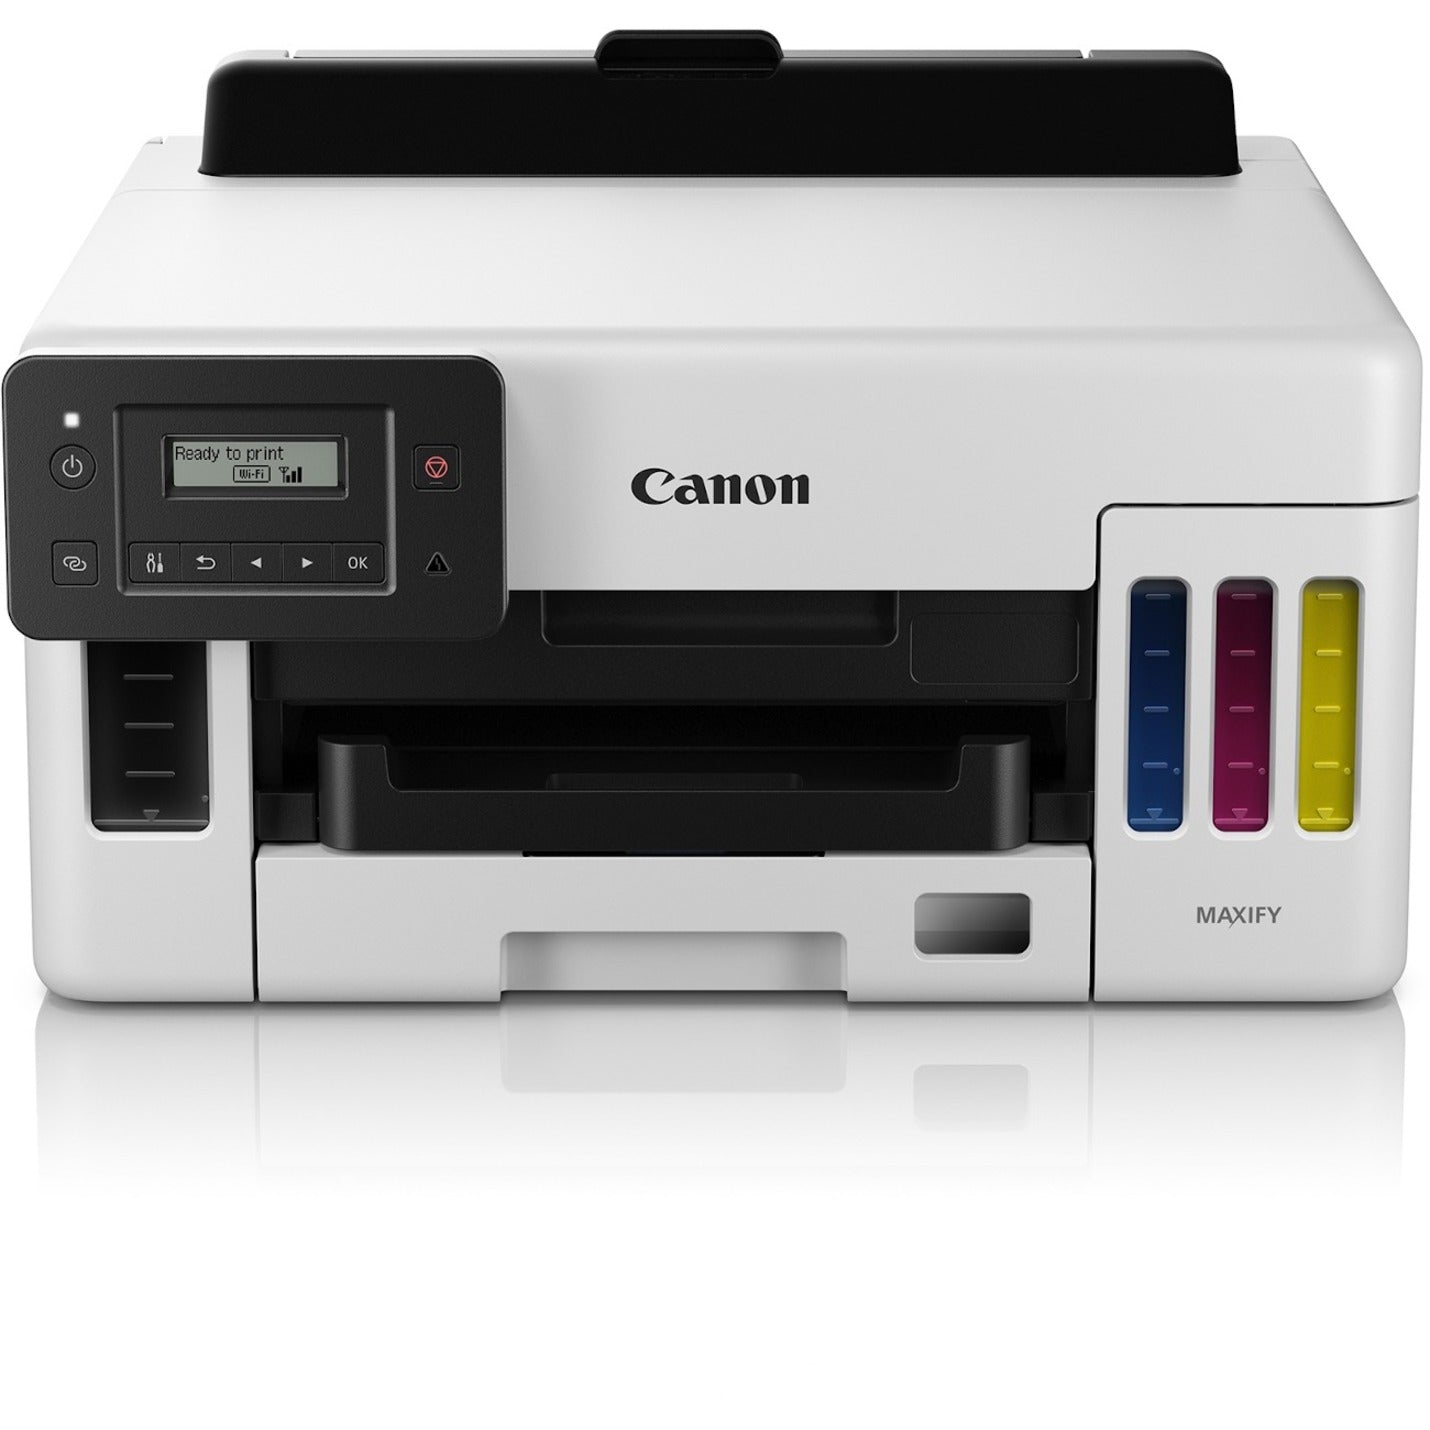 Canon 5550C002 MAXIFY GX5020 Wireless MegaTank Small Office Printer, Color Inkjet Printer with Automatic Duplex Printing, Wireless Connectivity